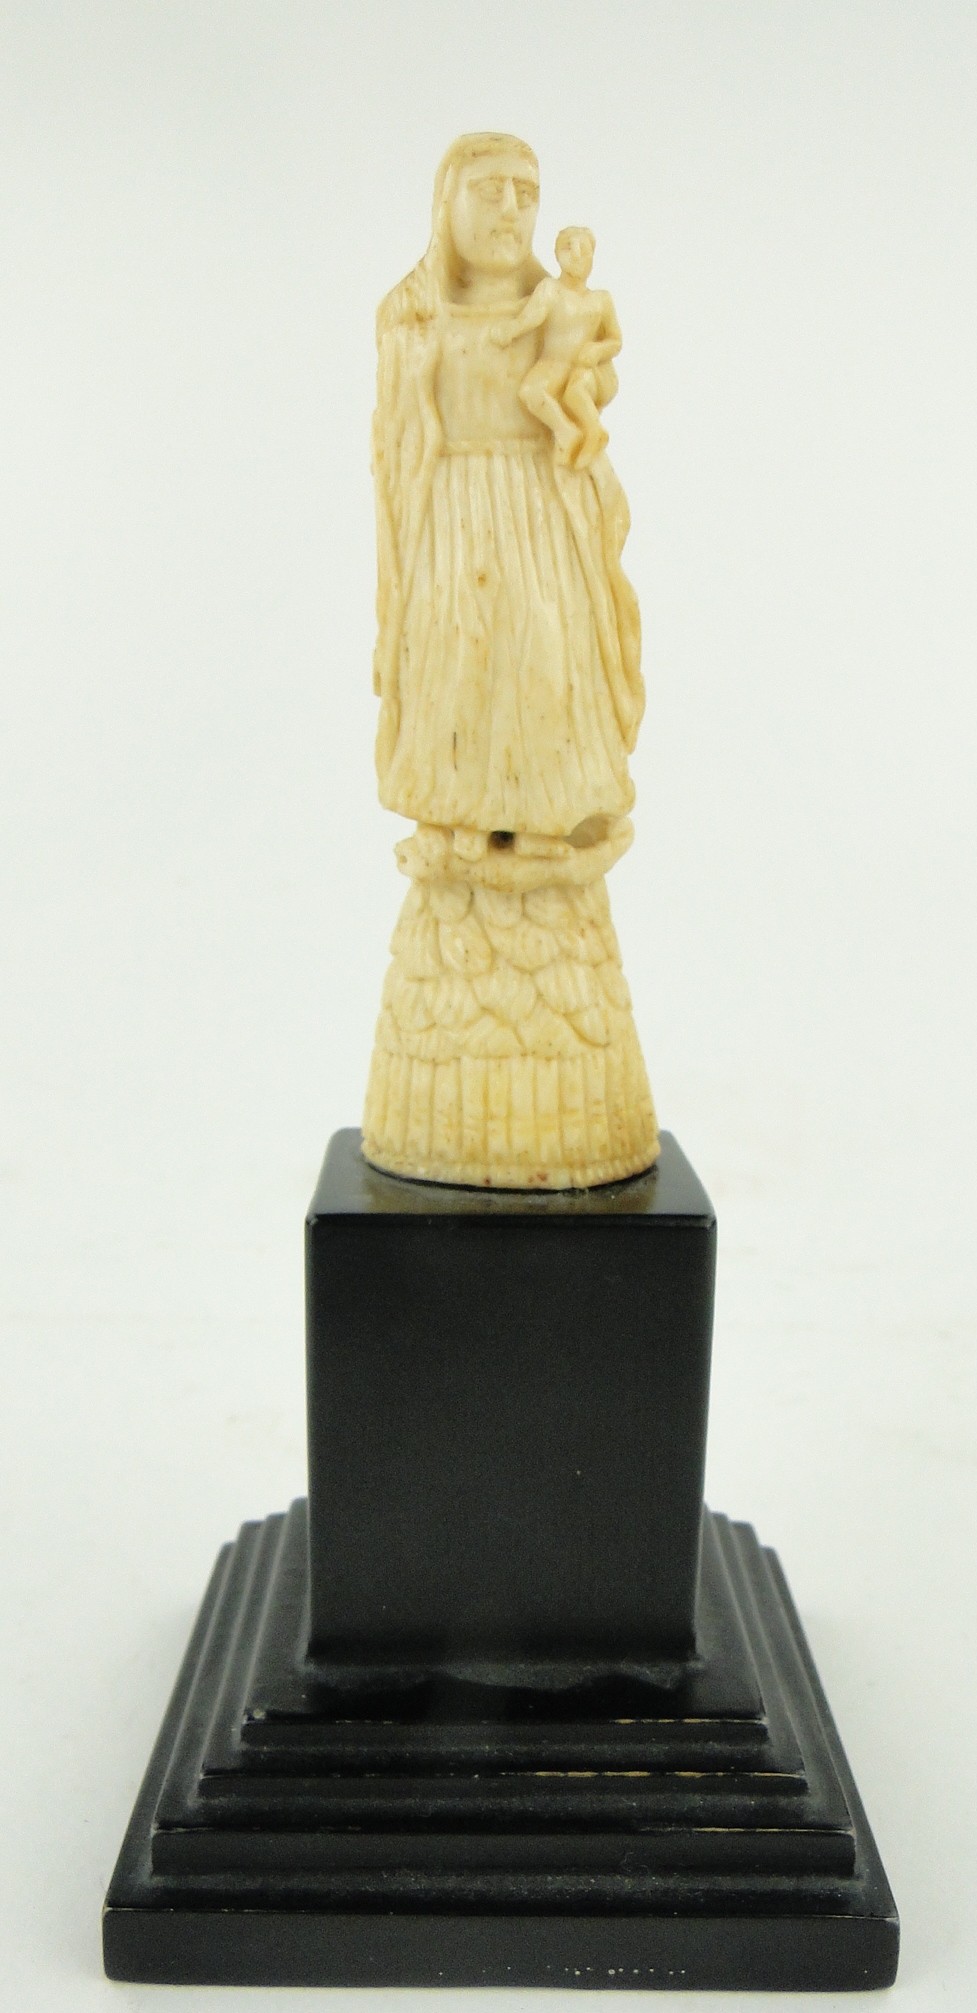 An early Goanese ivory figure of the Madonna and child, on wooden plinth, height 6" overall.